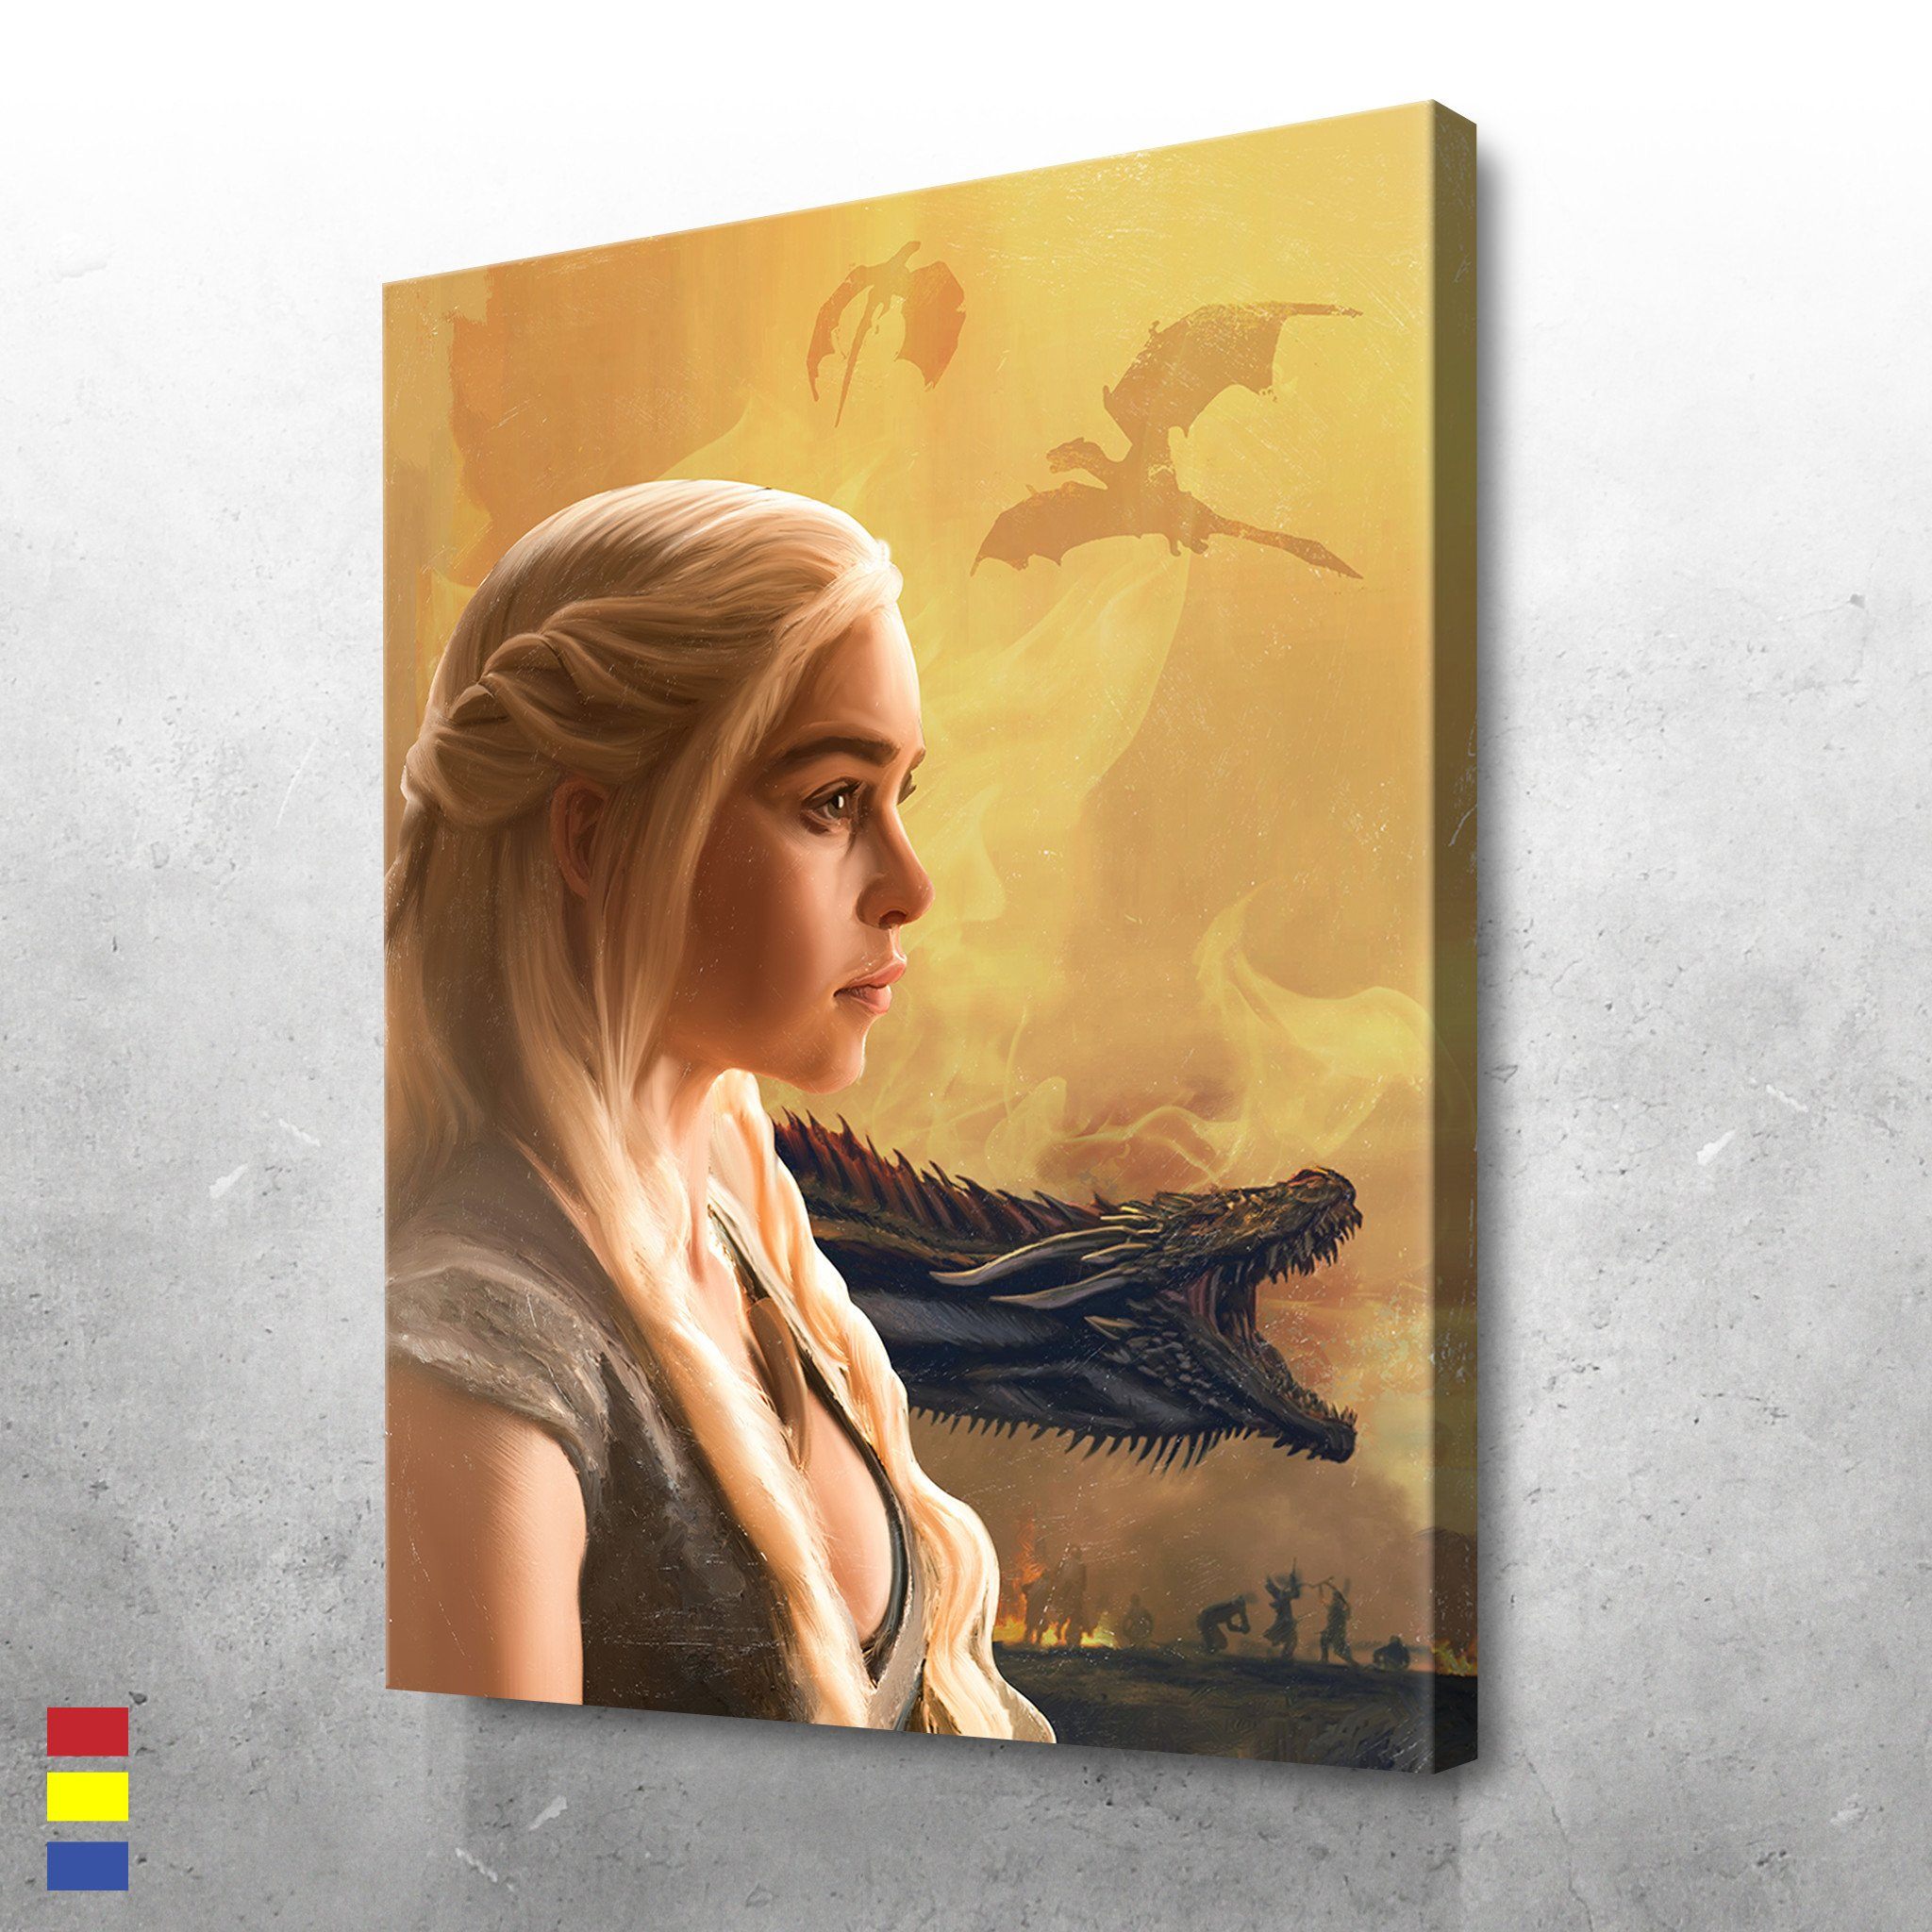 Mother of Dragons